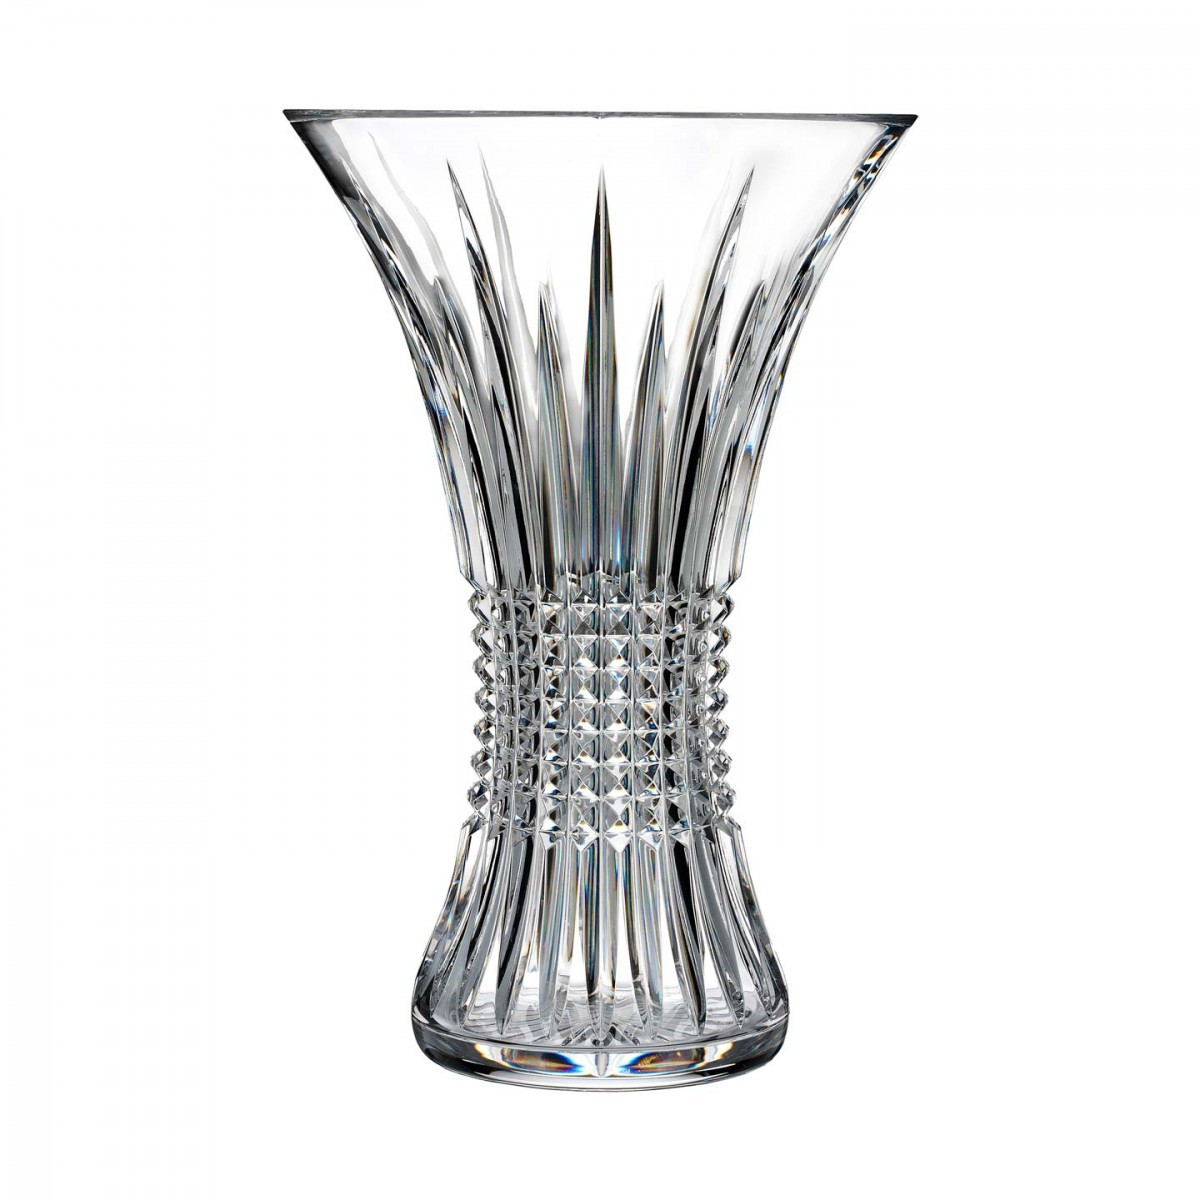 13 Lovable Waterford Marquis Markham Vase 2024 free download waterford marquis markham vase of lismore diamond 12in vase house of waterford crystal us for lismore diamond 12in vase